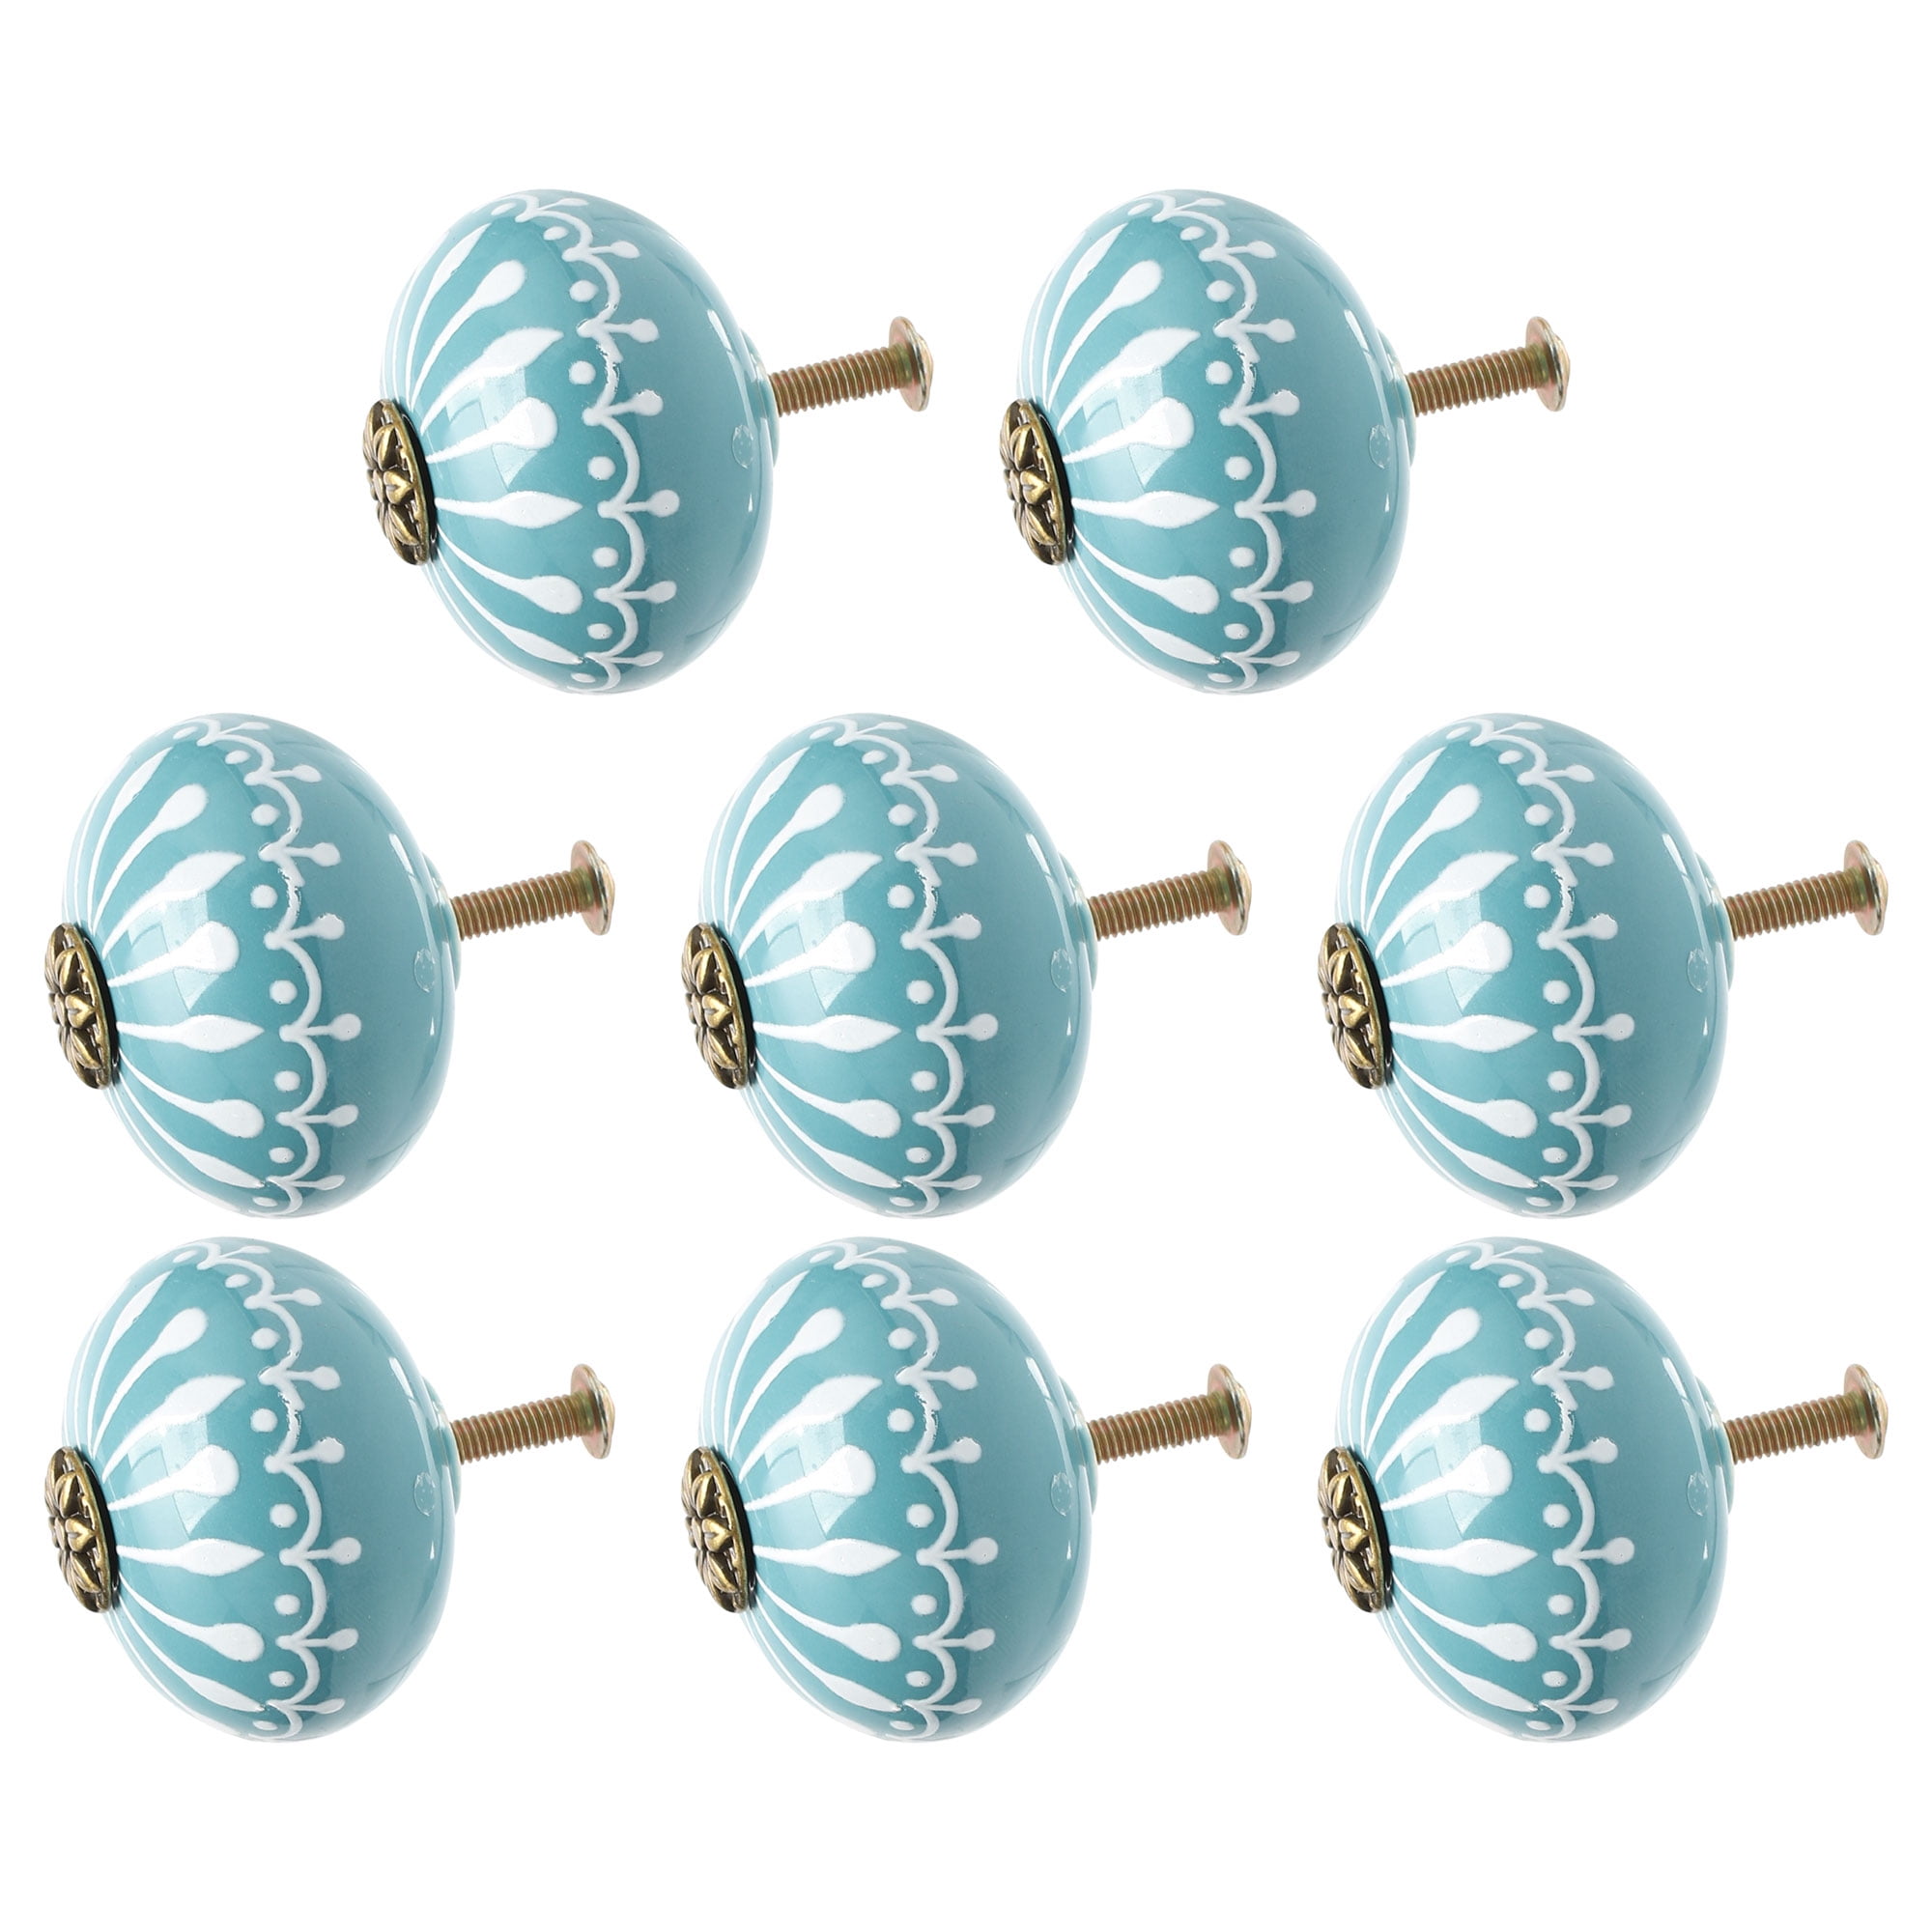 Uxcell Drawer Round Handle Cupboard Wardrobe Knobs Replacement Ceramic Blue 8pcs